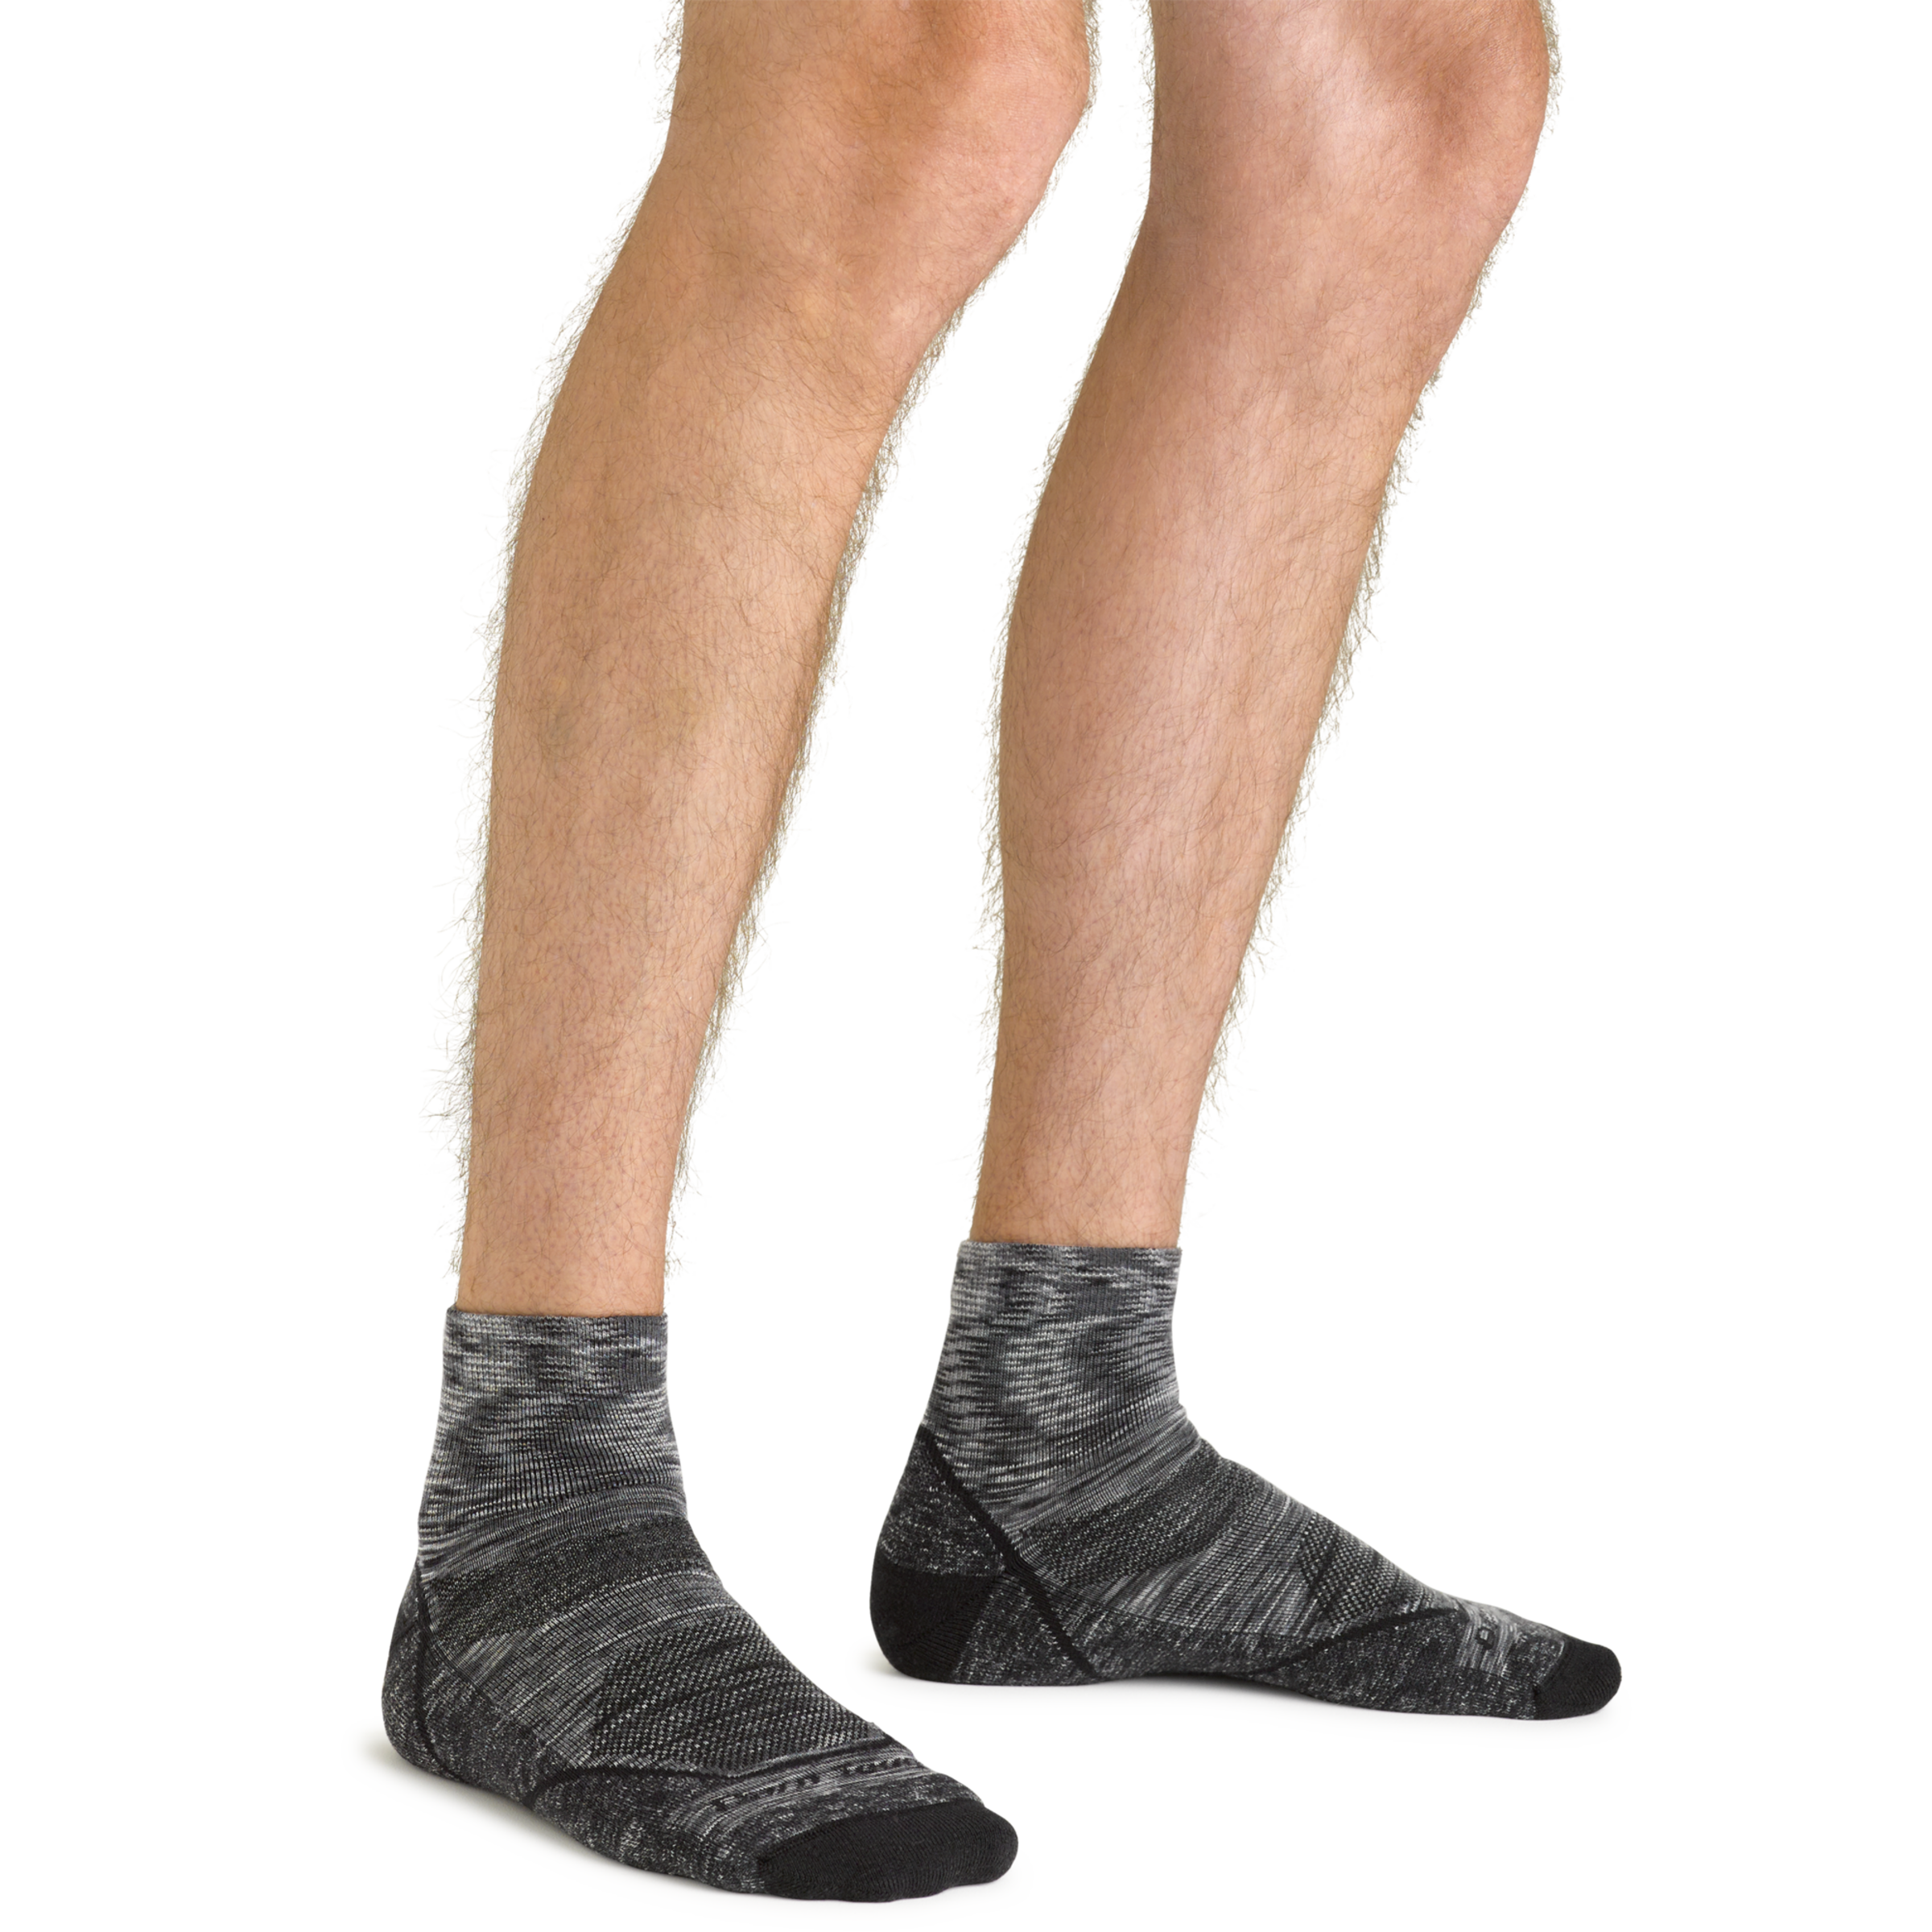 Clos up shot of model wearing the men's light hiker quarter hiking sock in space gray with no shoes on